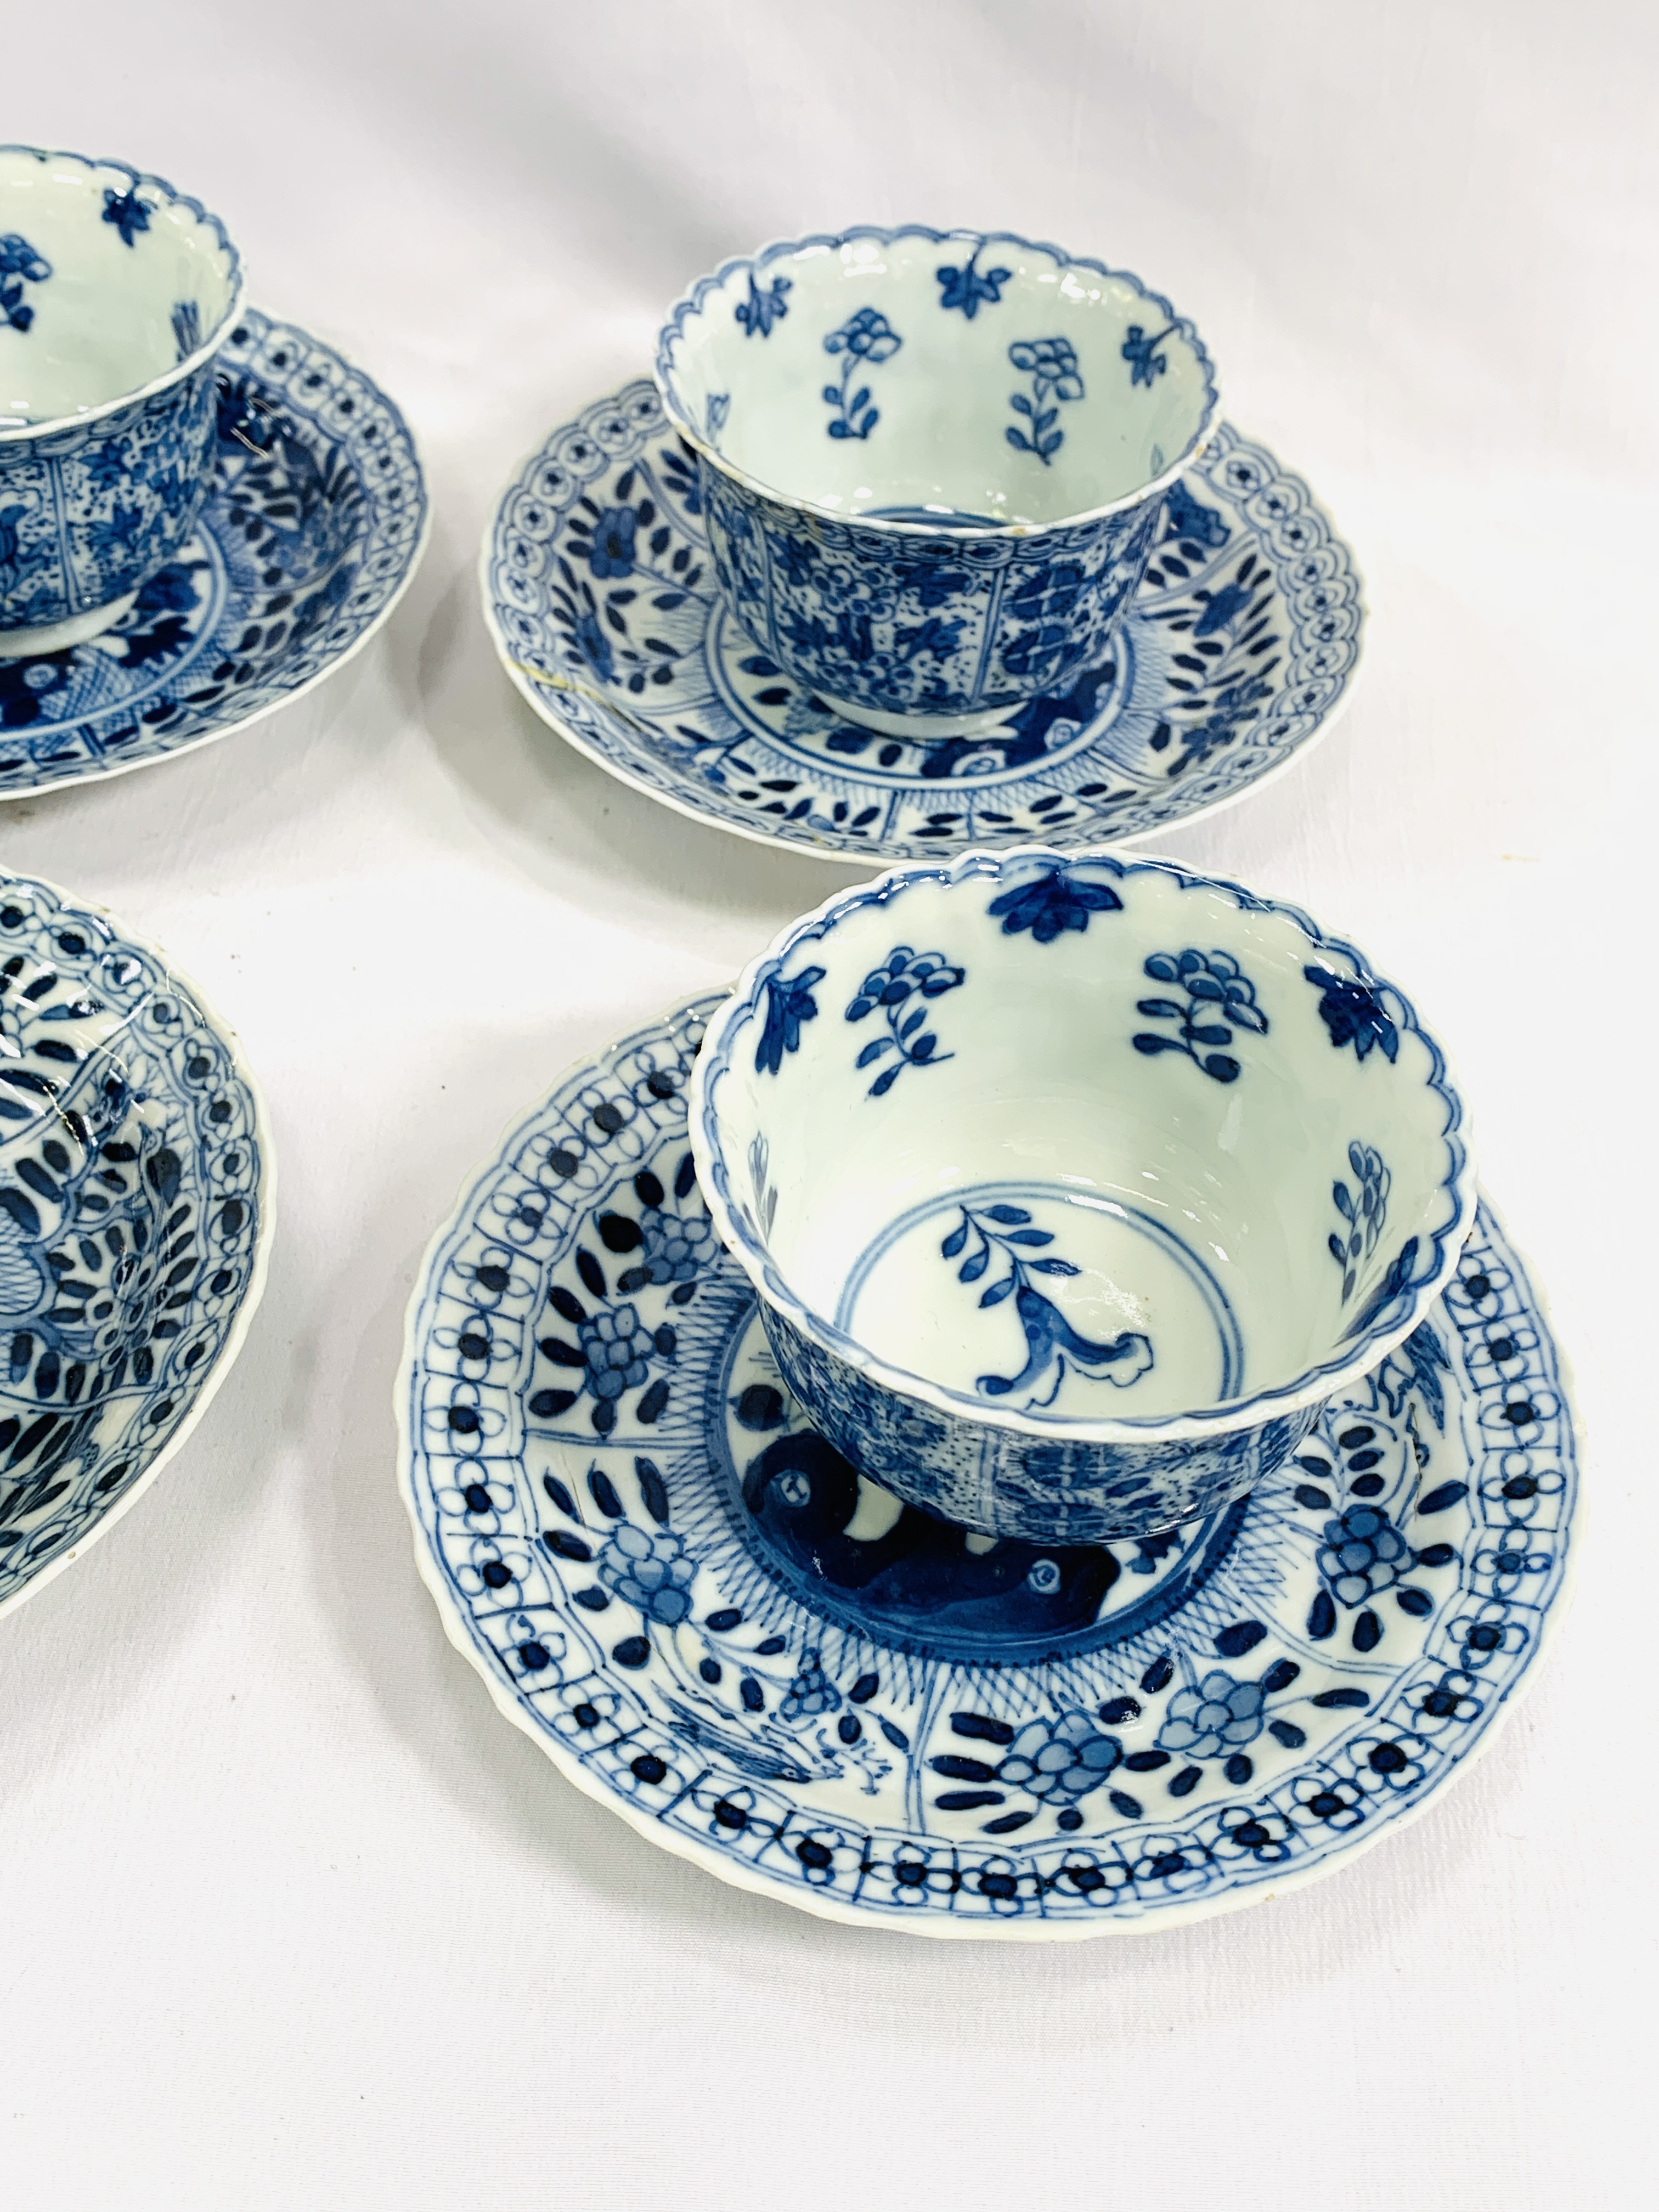 Chinese blue and white tea bowls and saucers - Image 2 of 4